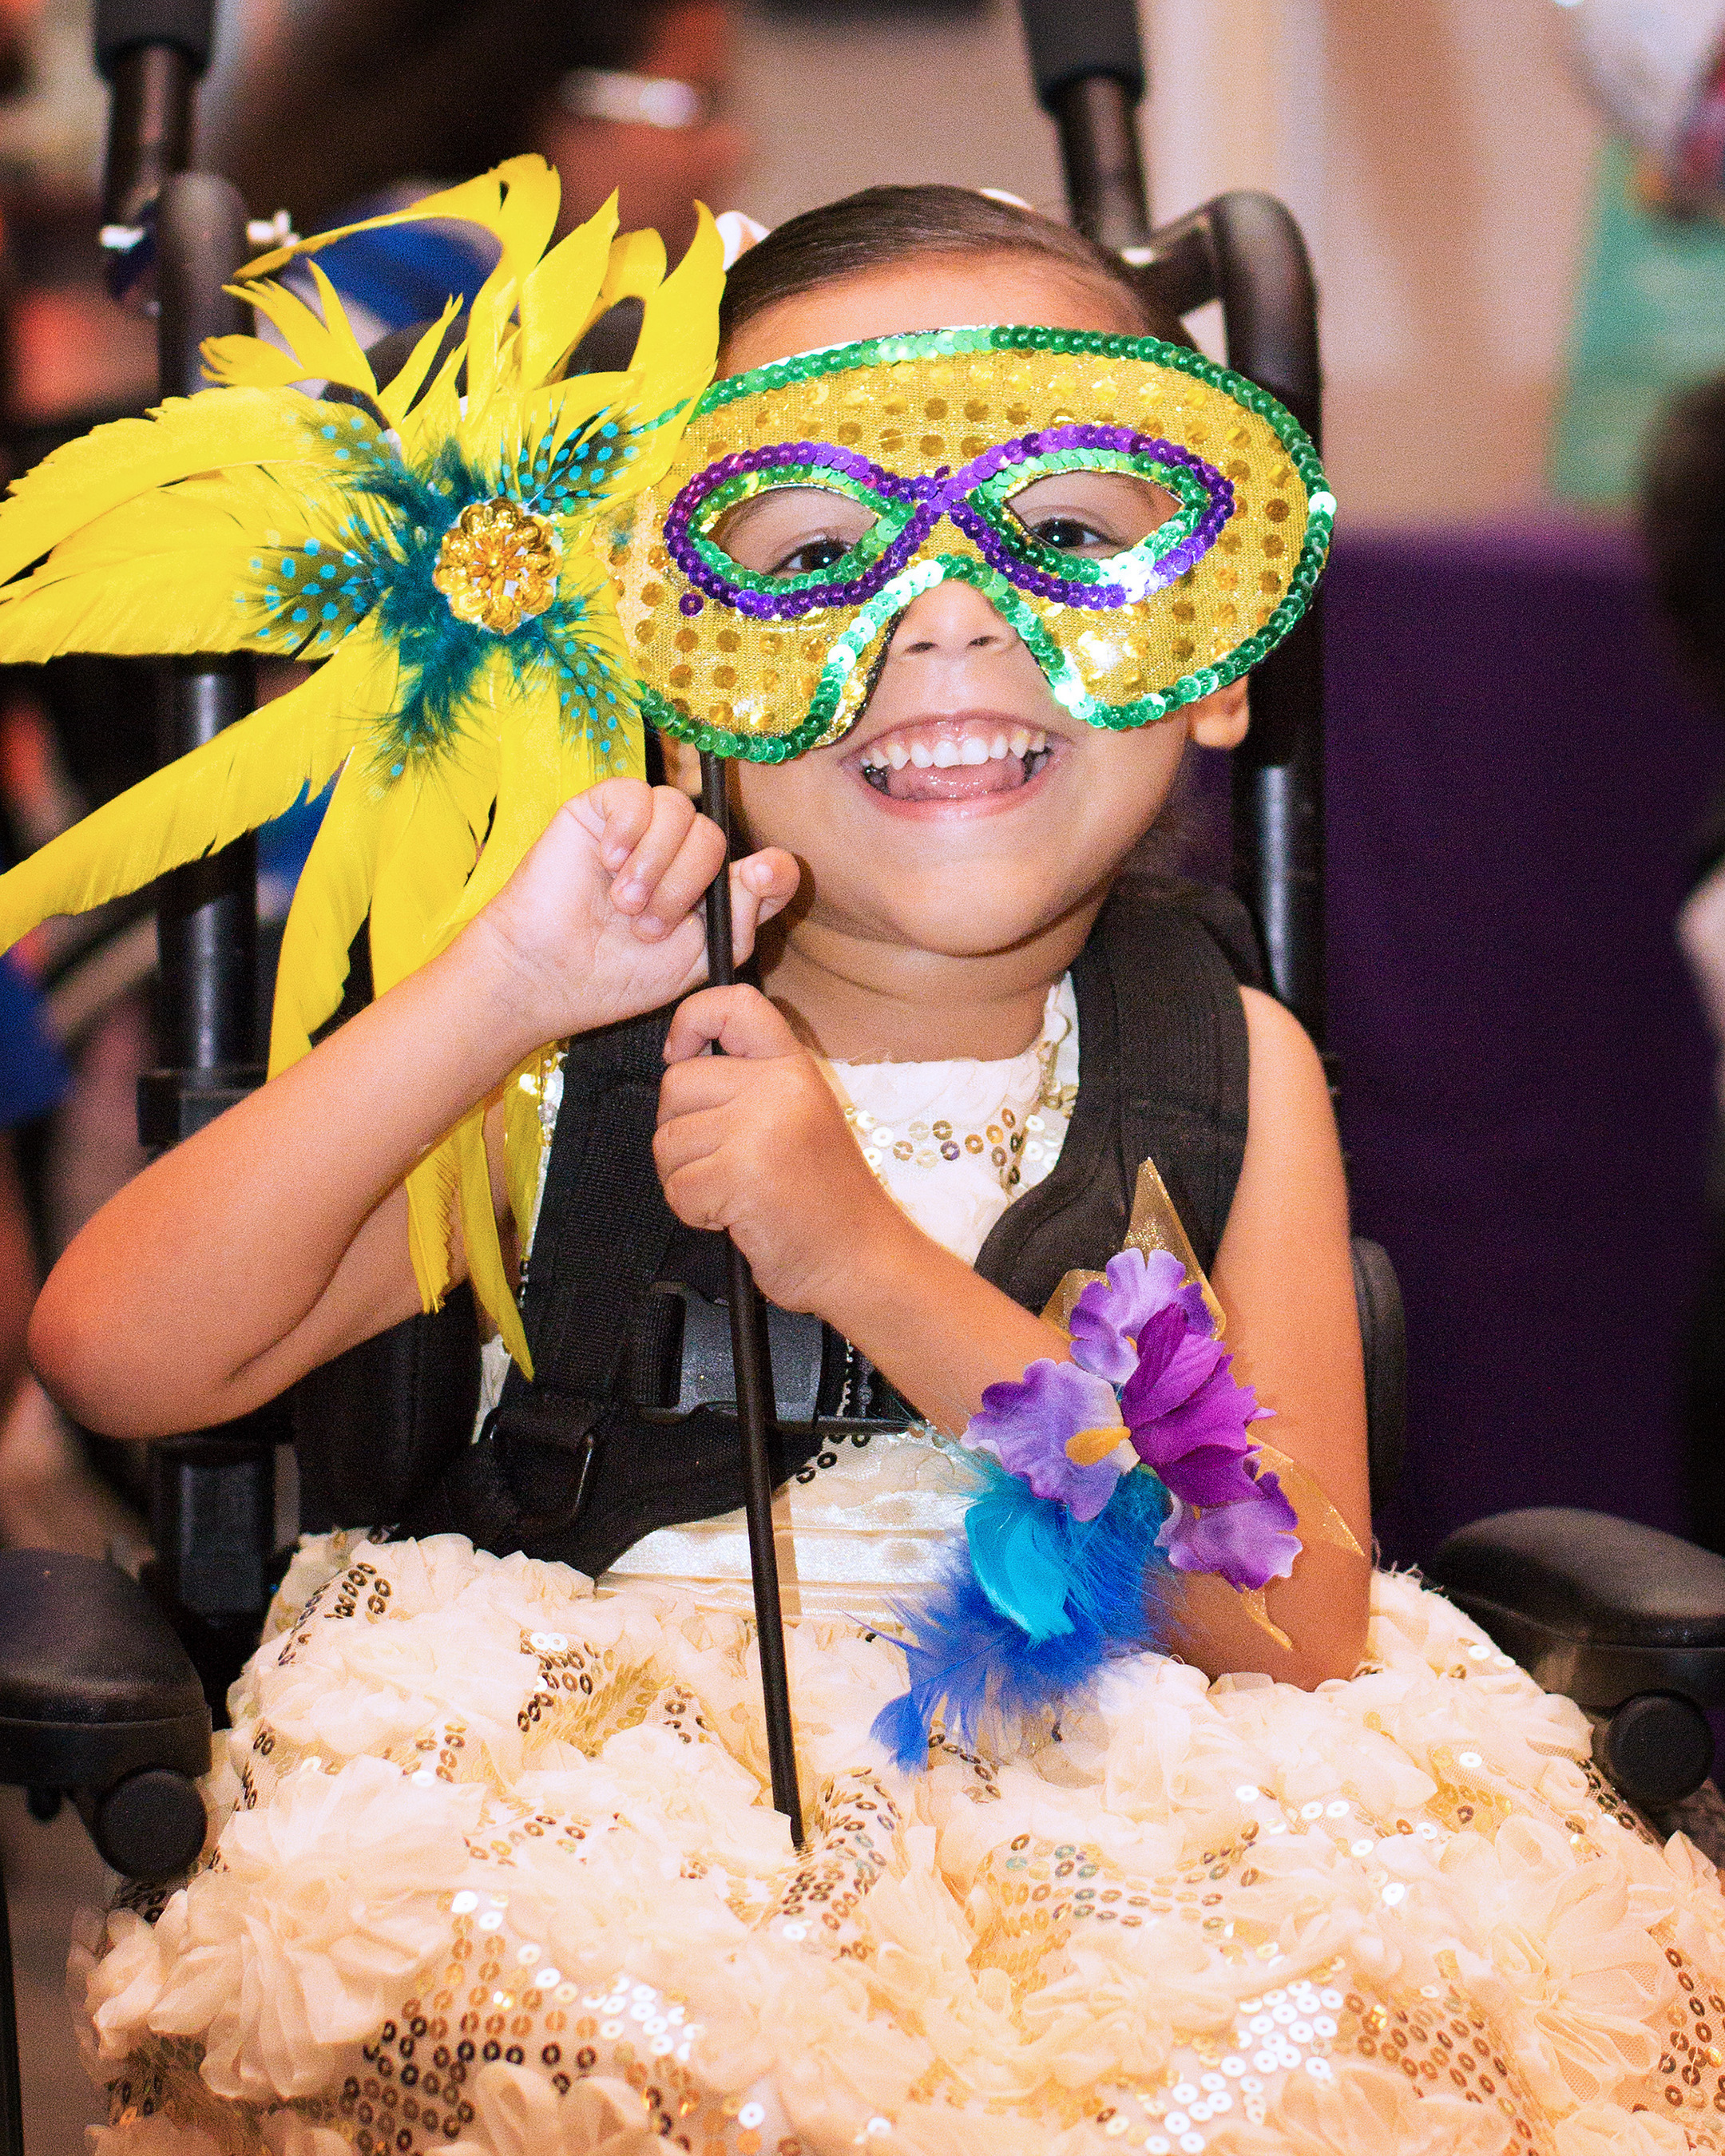 Pediatric patients at St. Joseph's Children's Hospital in Tampa enjoy a masquerade-themed prom held in their honor Friday, April 25, 2014.  (PRNewsFoto/St. Joseph's Children's Hospital)